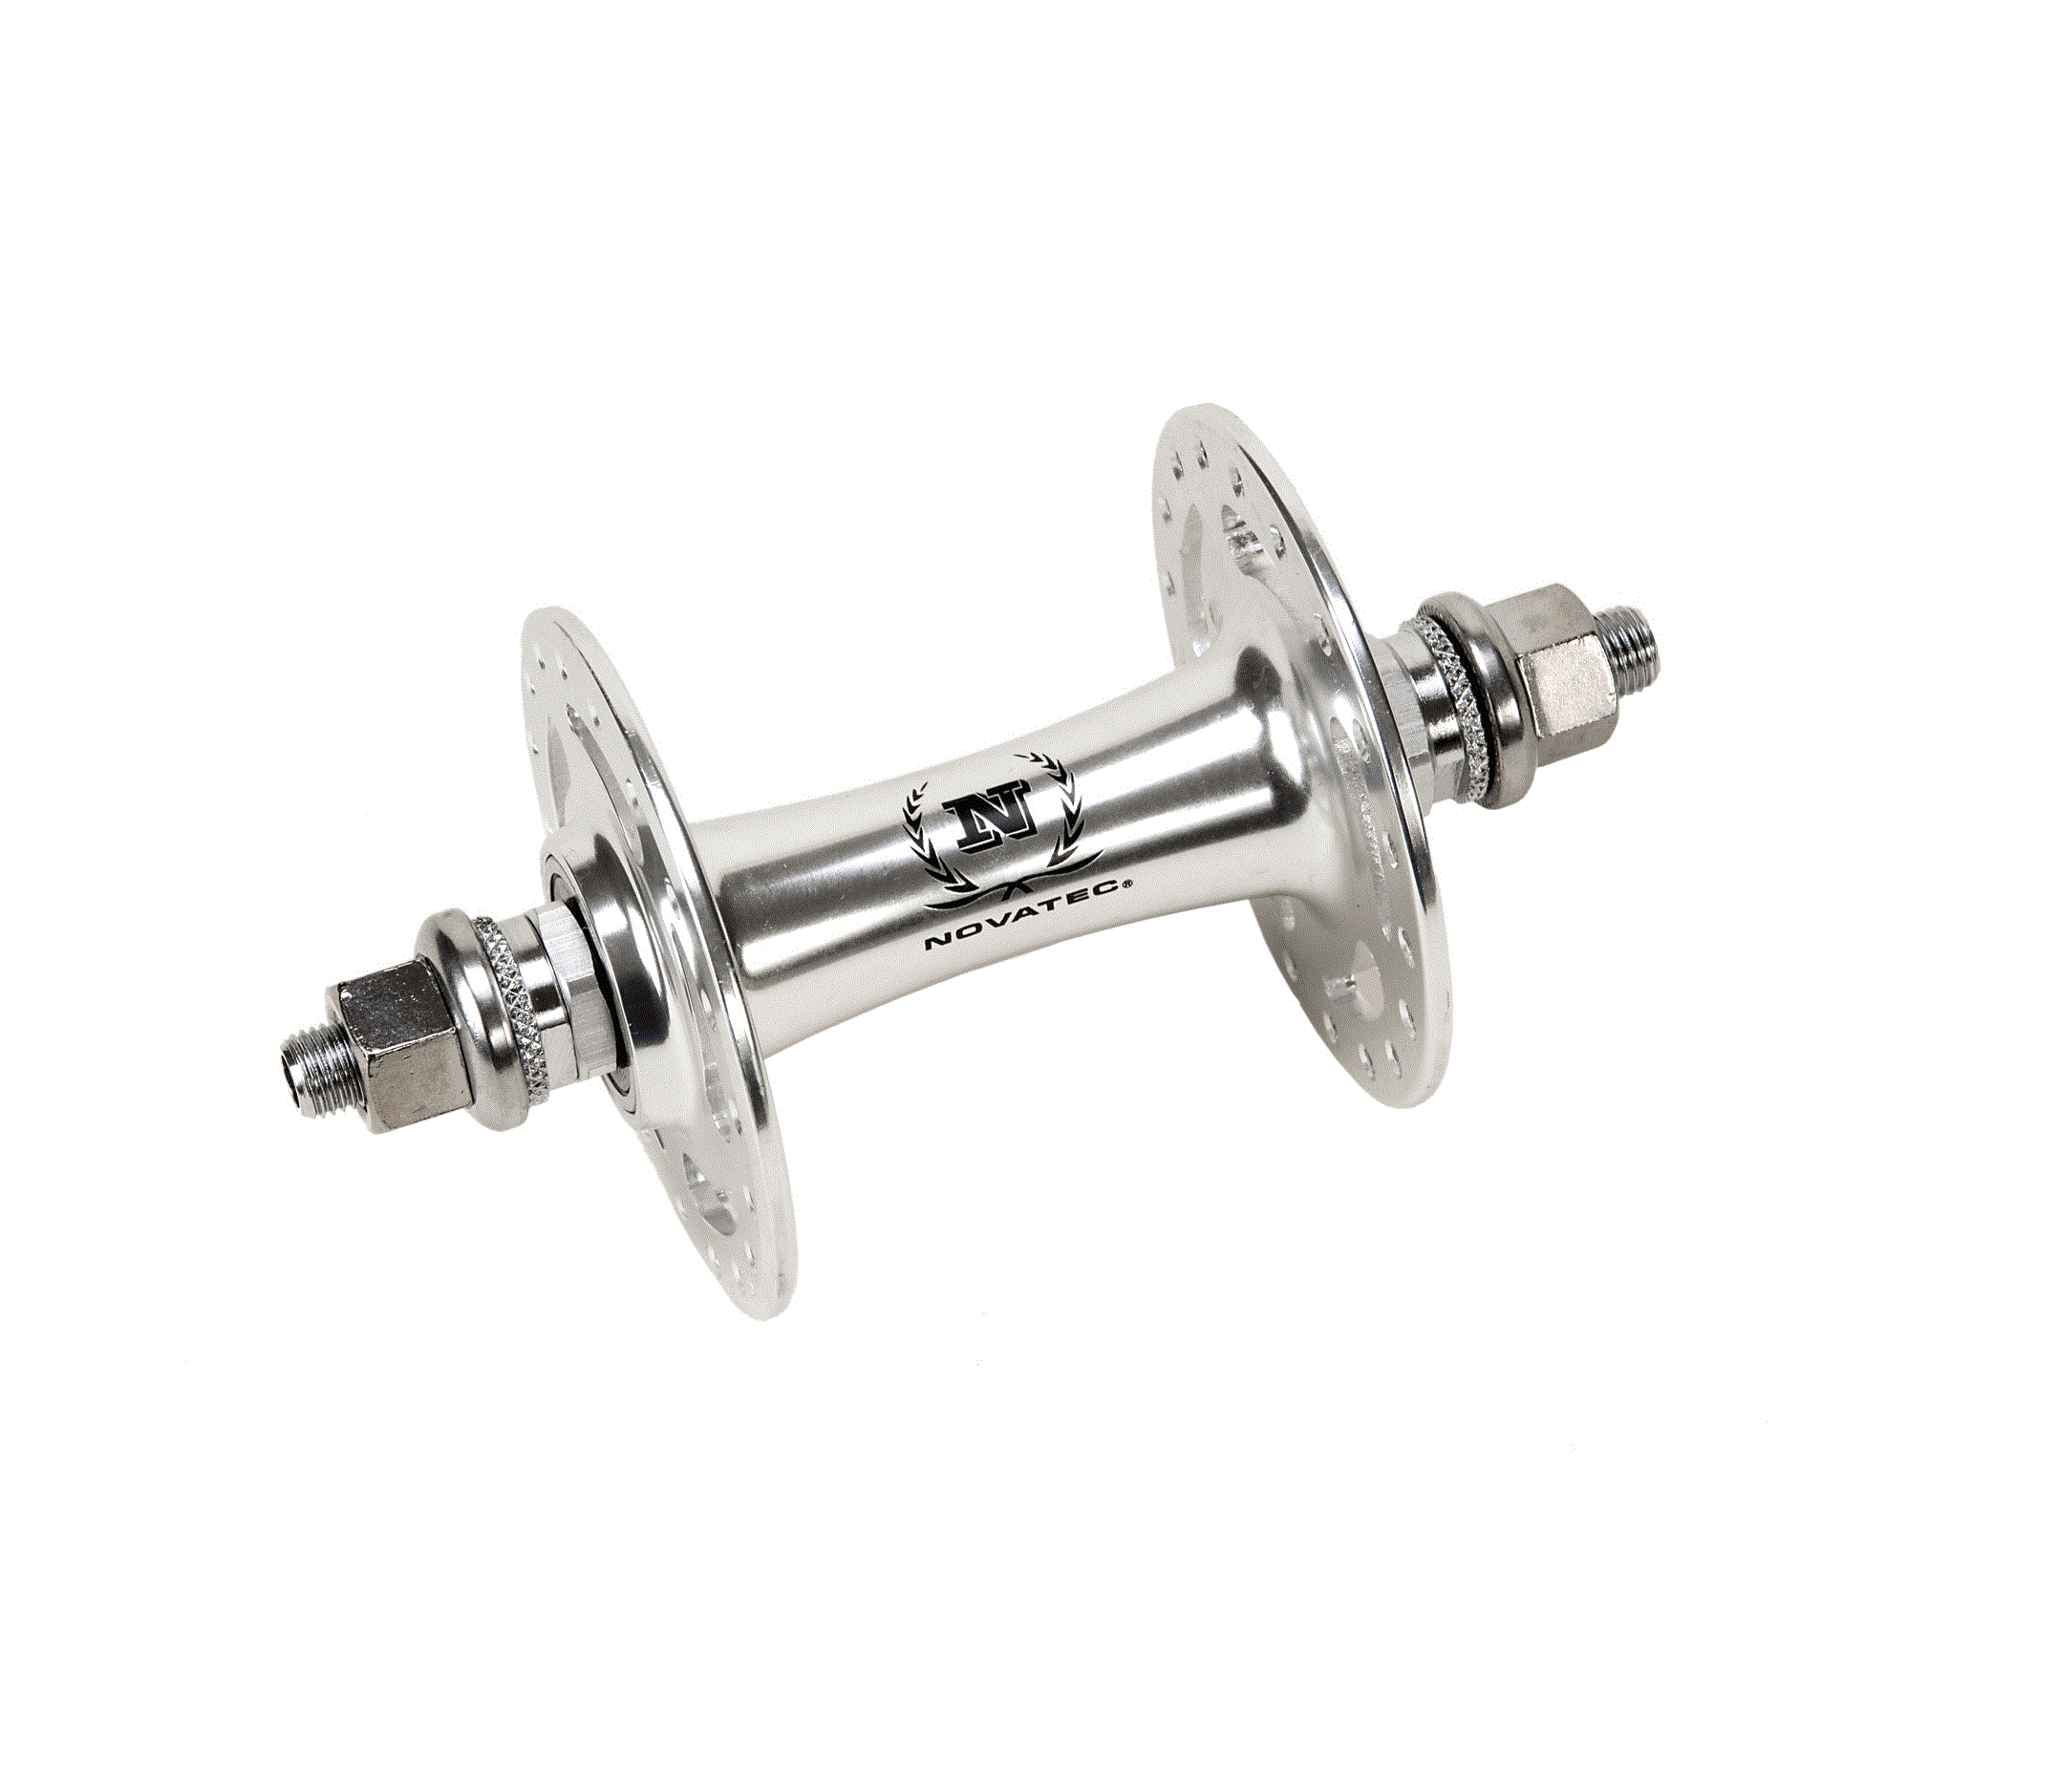 HJ850- Rear Alloy track Hub, 36H With Sealed Bearings,Double Sid